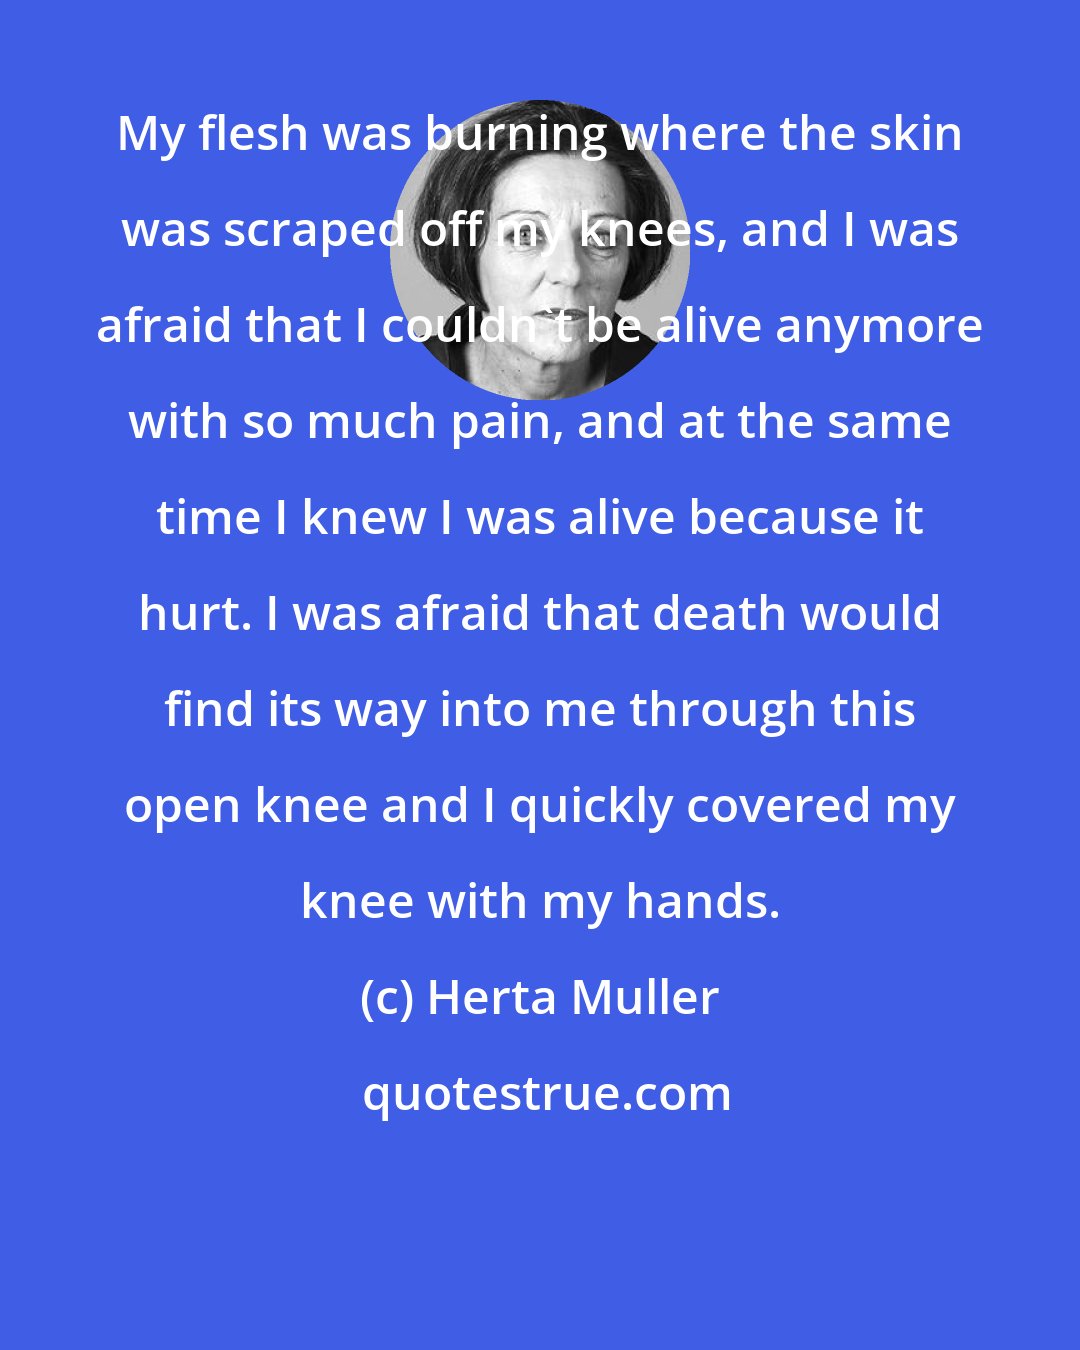 Herta Muller: My flesh was burning where the skin was scraped off my knees, and I was afraid that I couldn't be alive anymore with so much pain, and at the same time I knew I was alive because it hurt. I was afraid that death would find its way into me through this open knee and I quickly covered my knee with my hands.